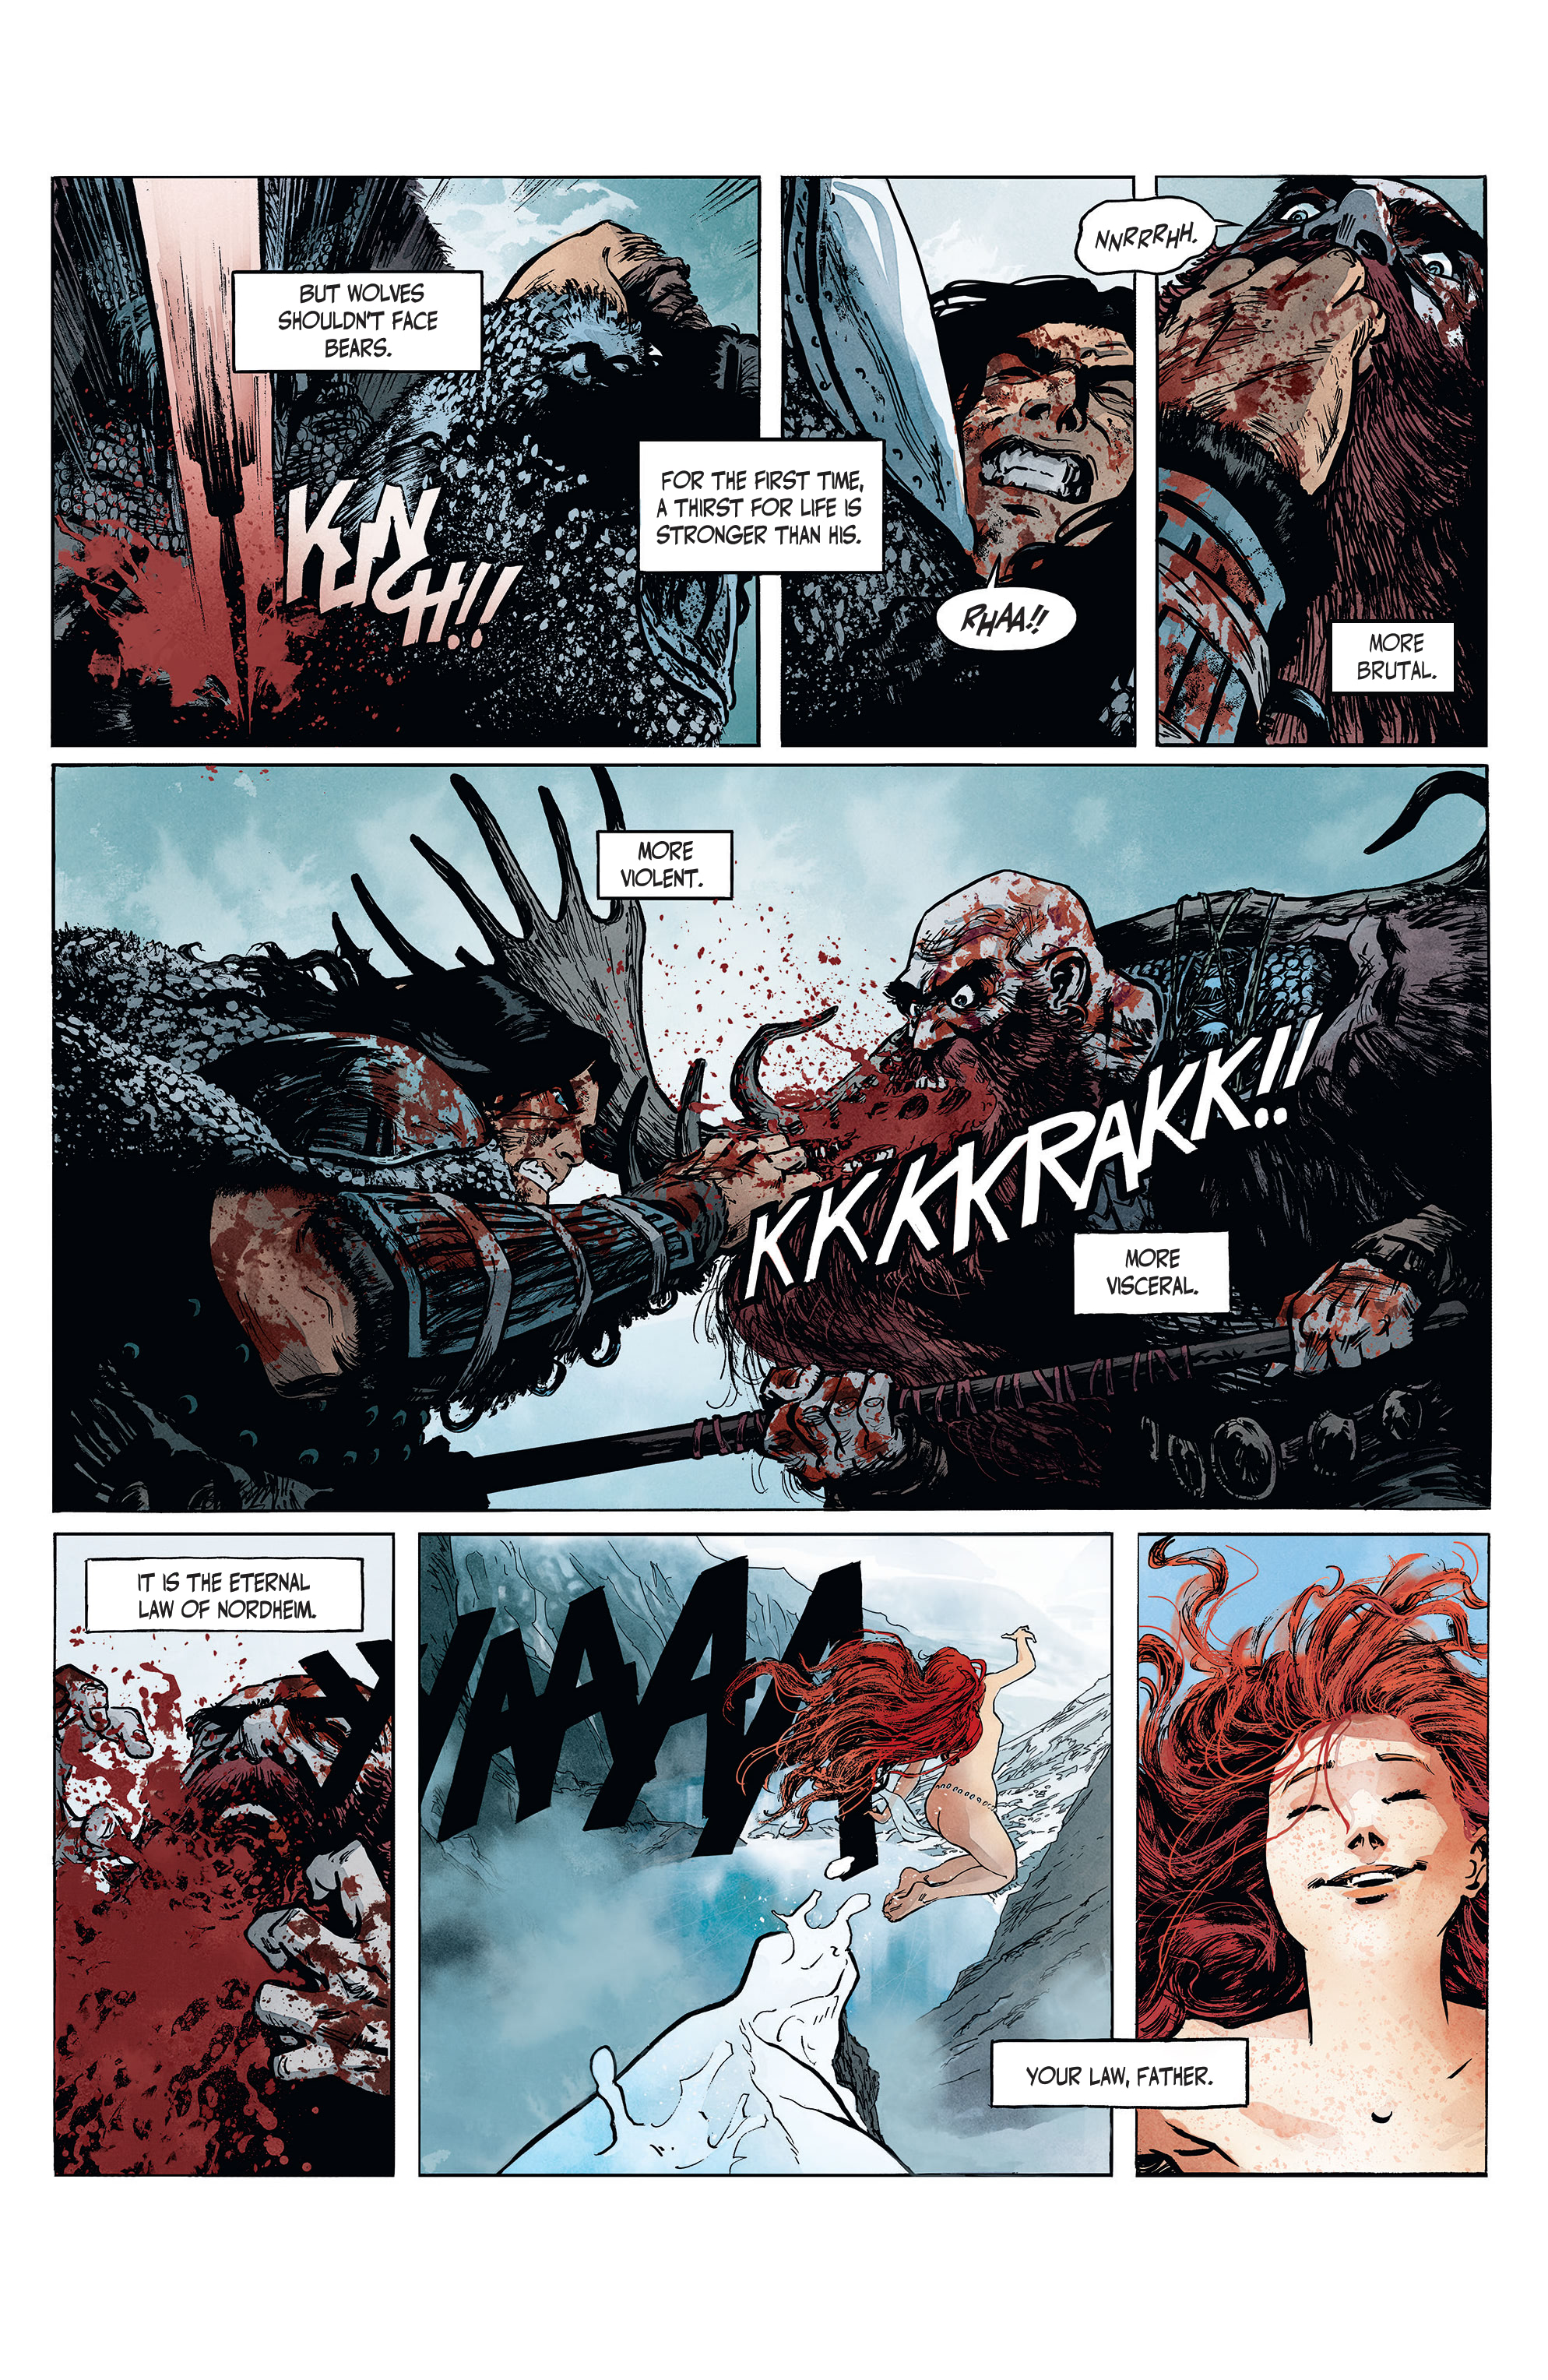 The Cimmerian: The Frost-Giant's Daughter (2020-): Chapter 2 - Page 4